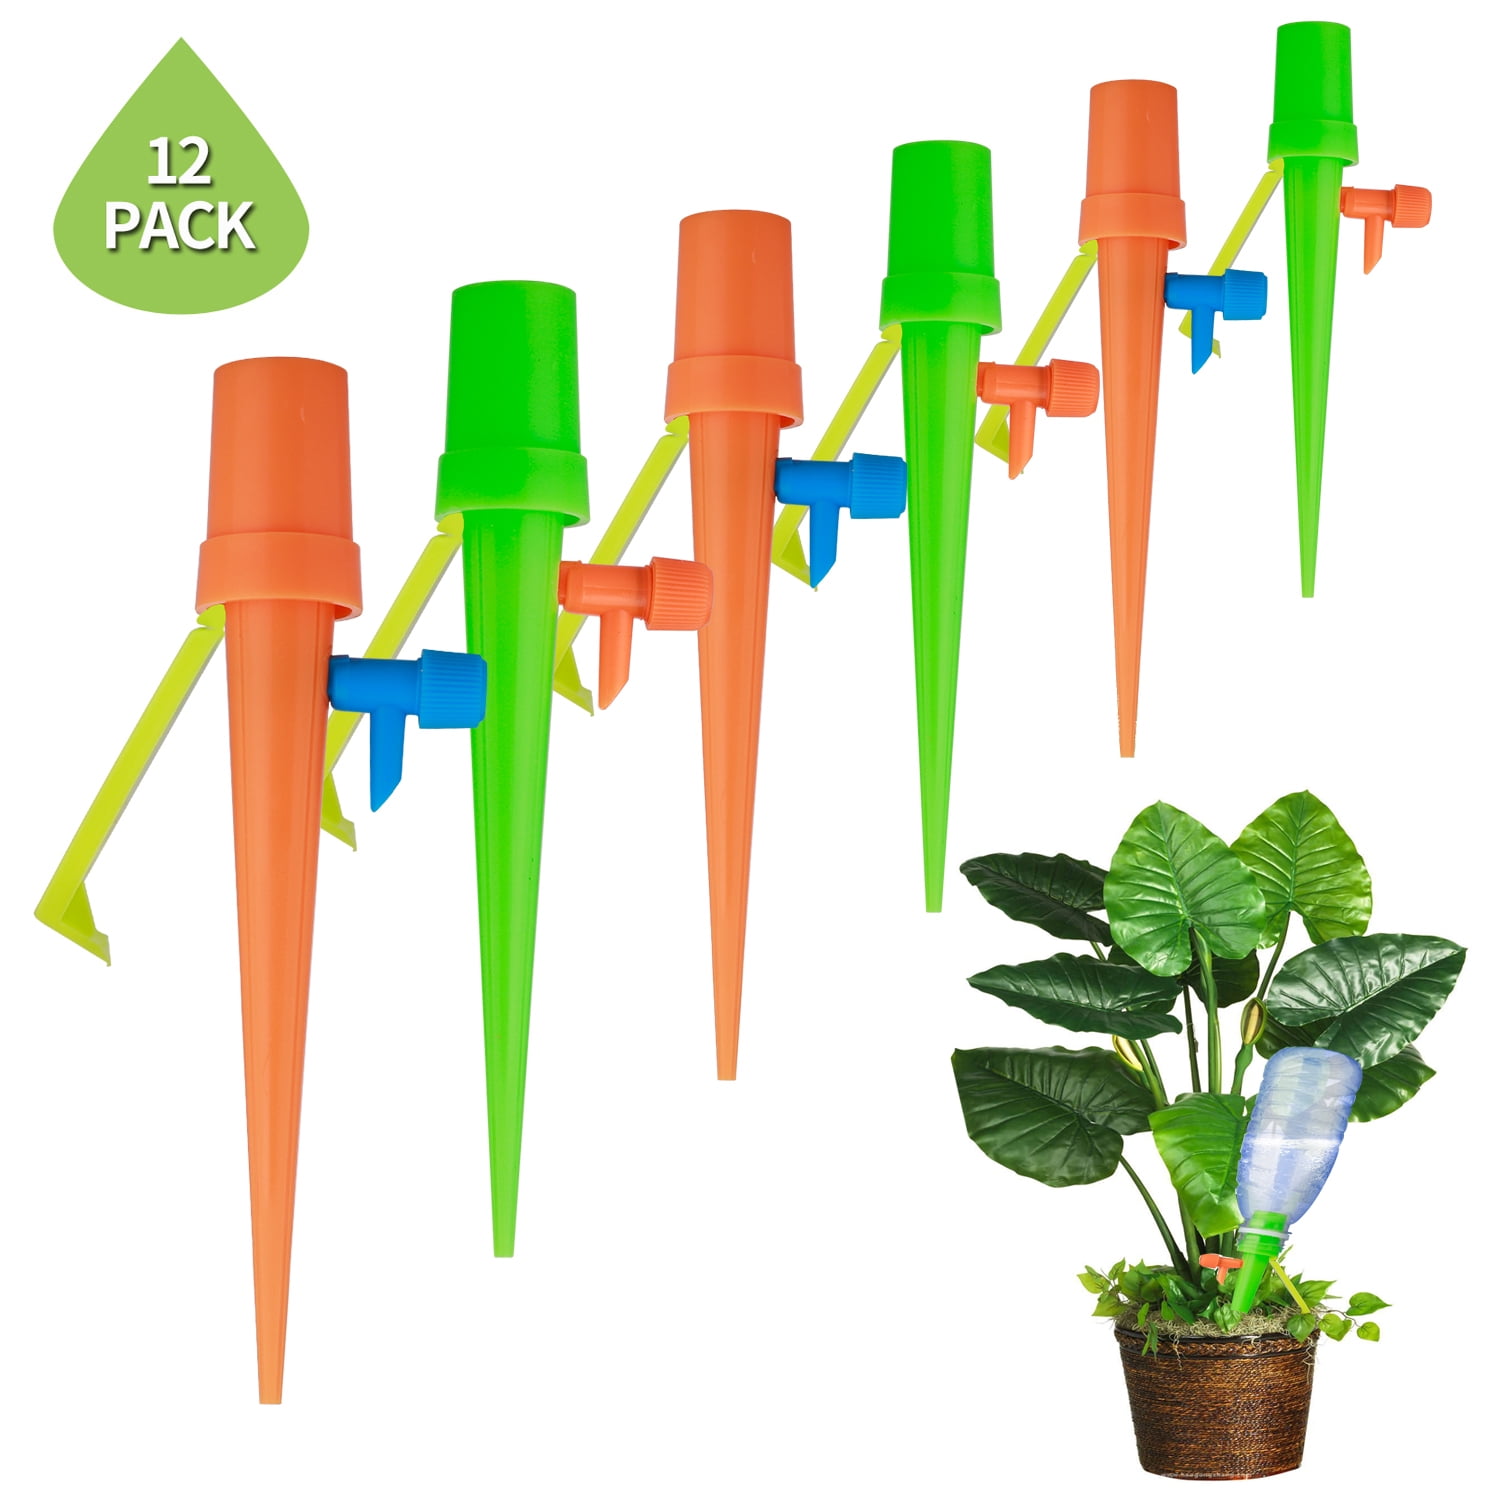 12X Auto Self Watering Device Waterer Houseplant Plant Feeder Irrigation System 